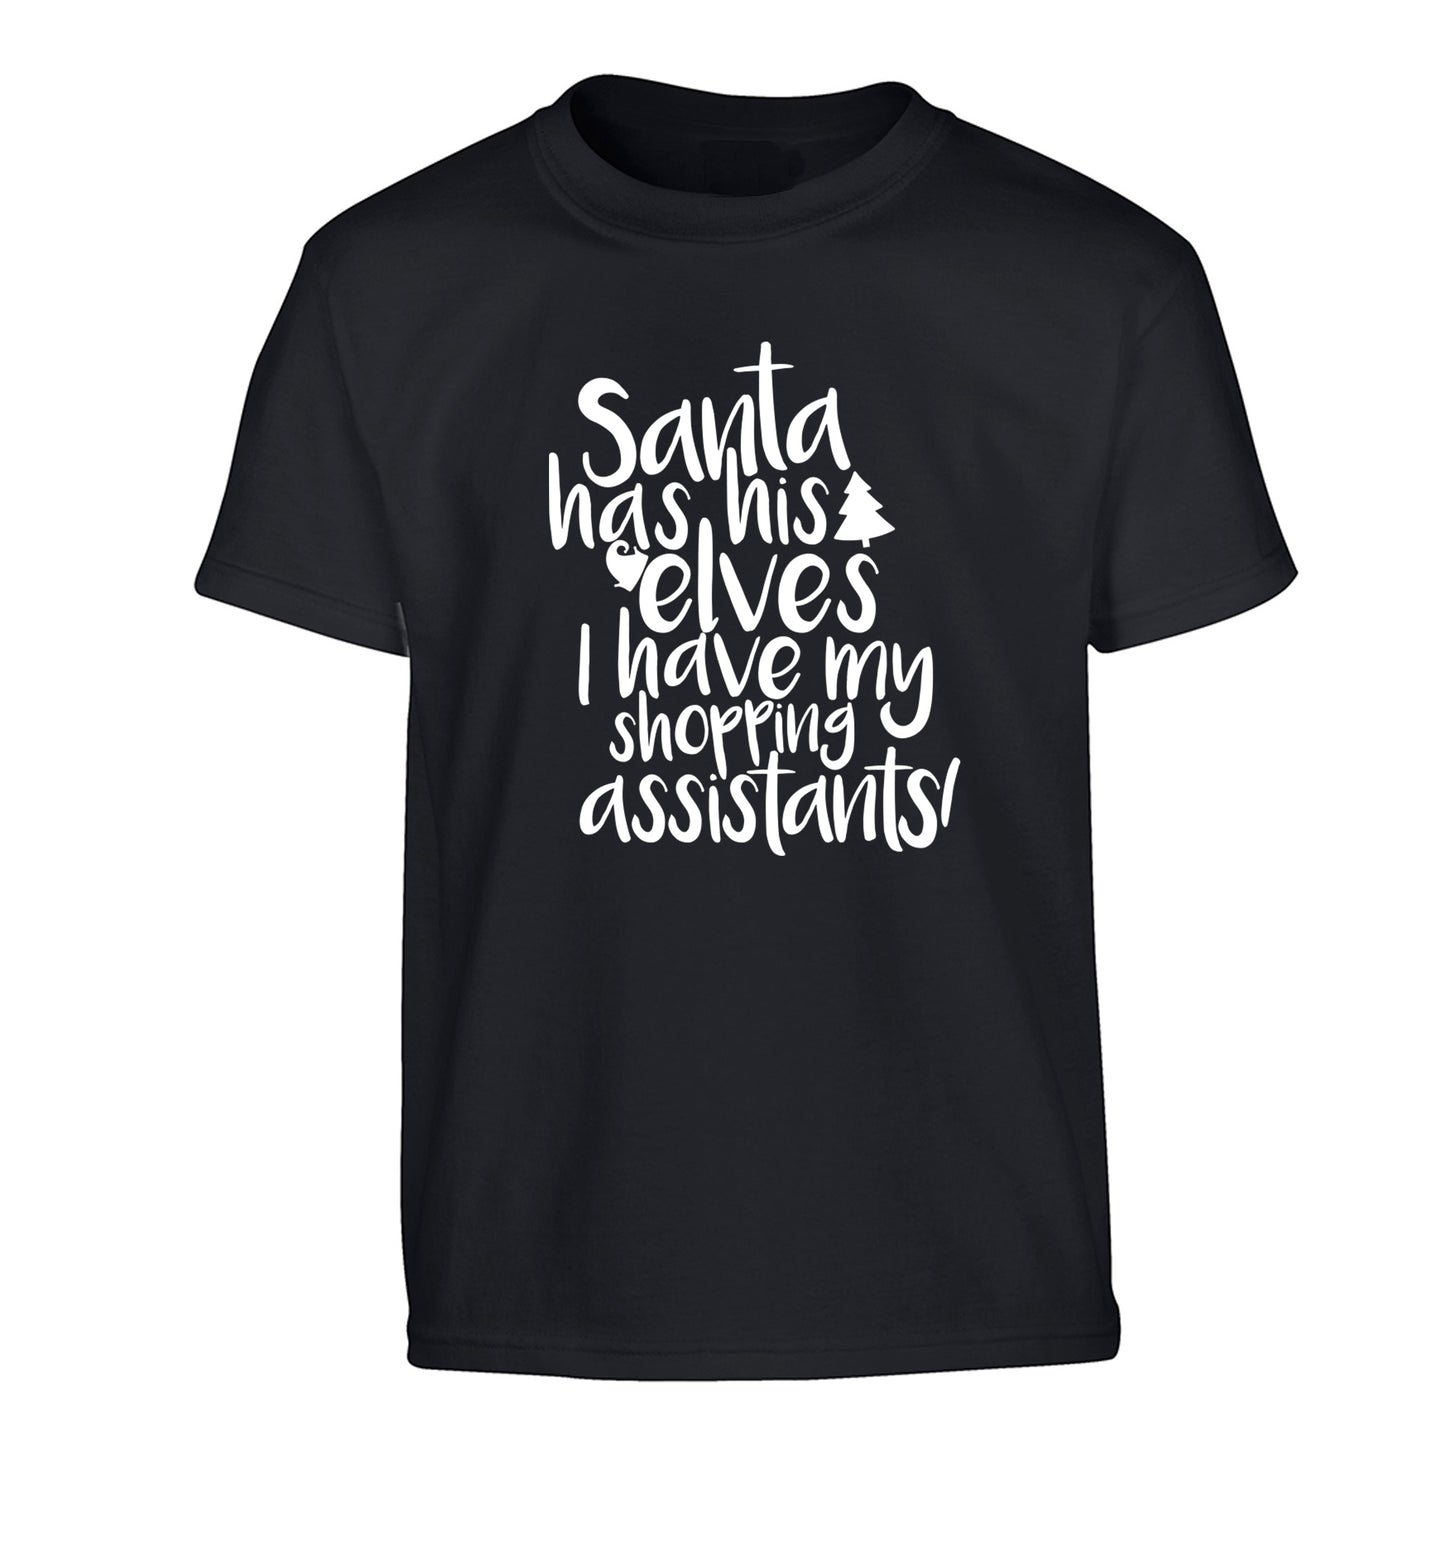 Santa has his elves I have my shopping assistant Children's black Tshirt 12-14 Years